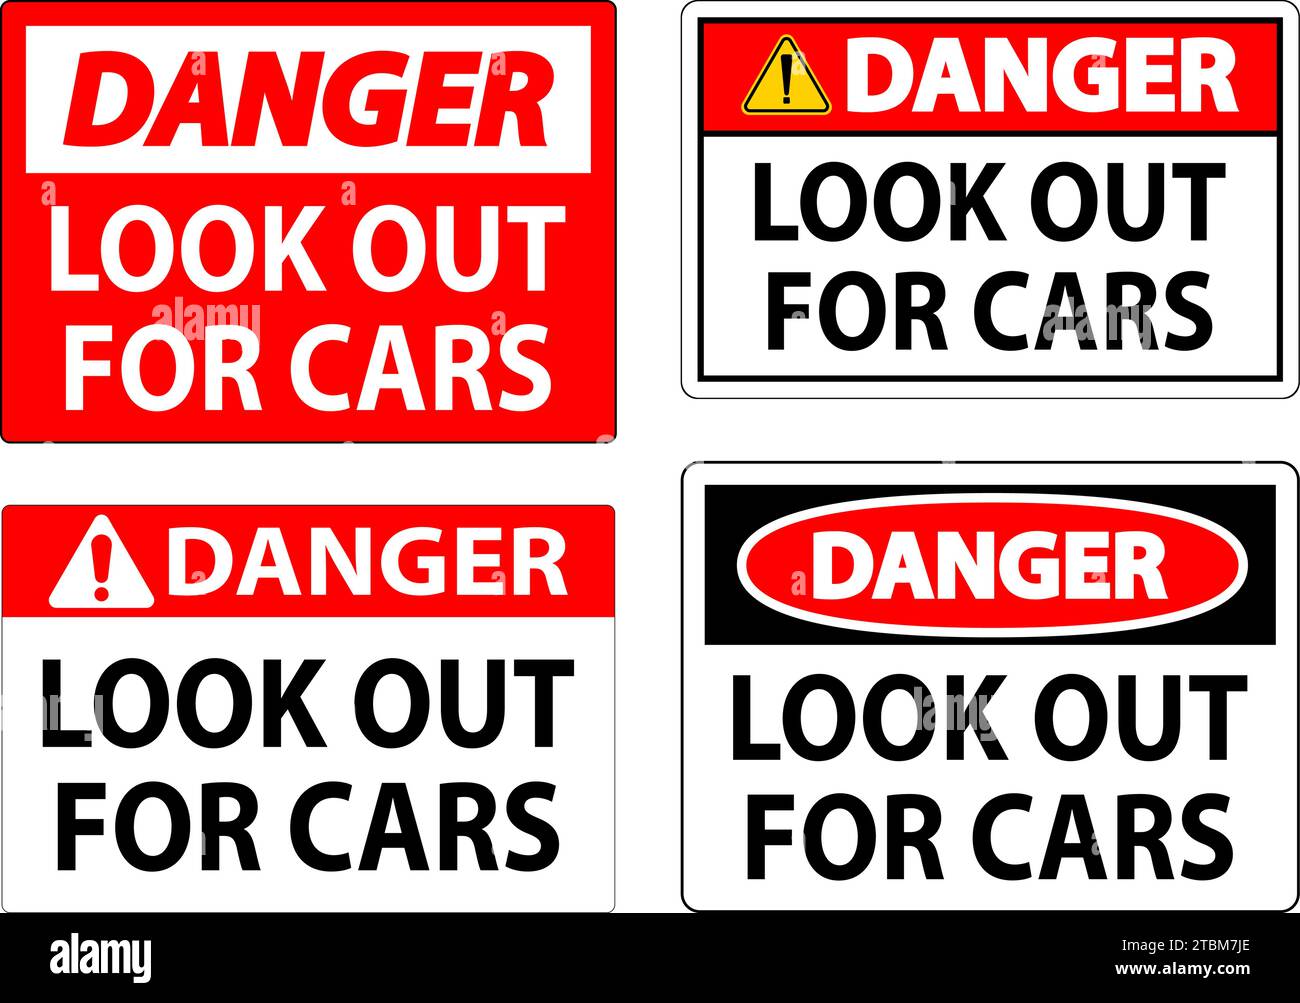 Danger Sign Look Out for Cars Stock Vector